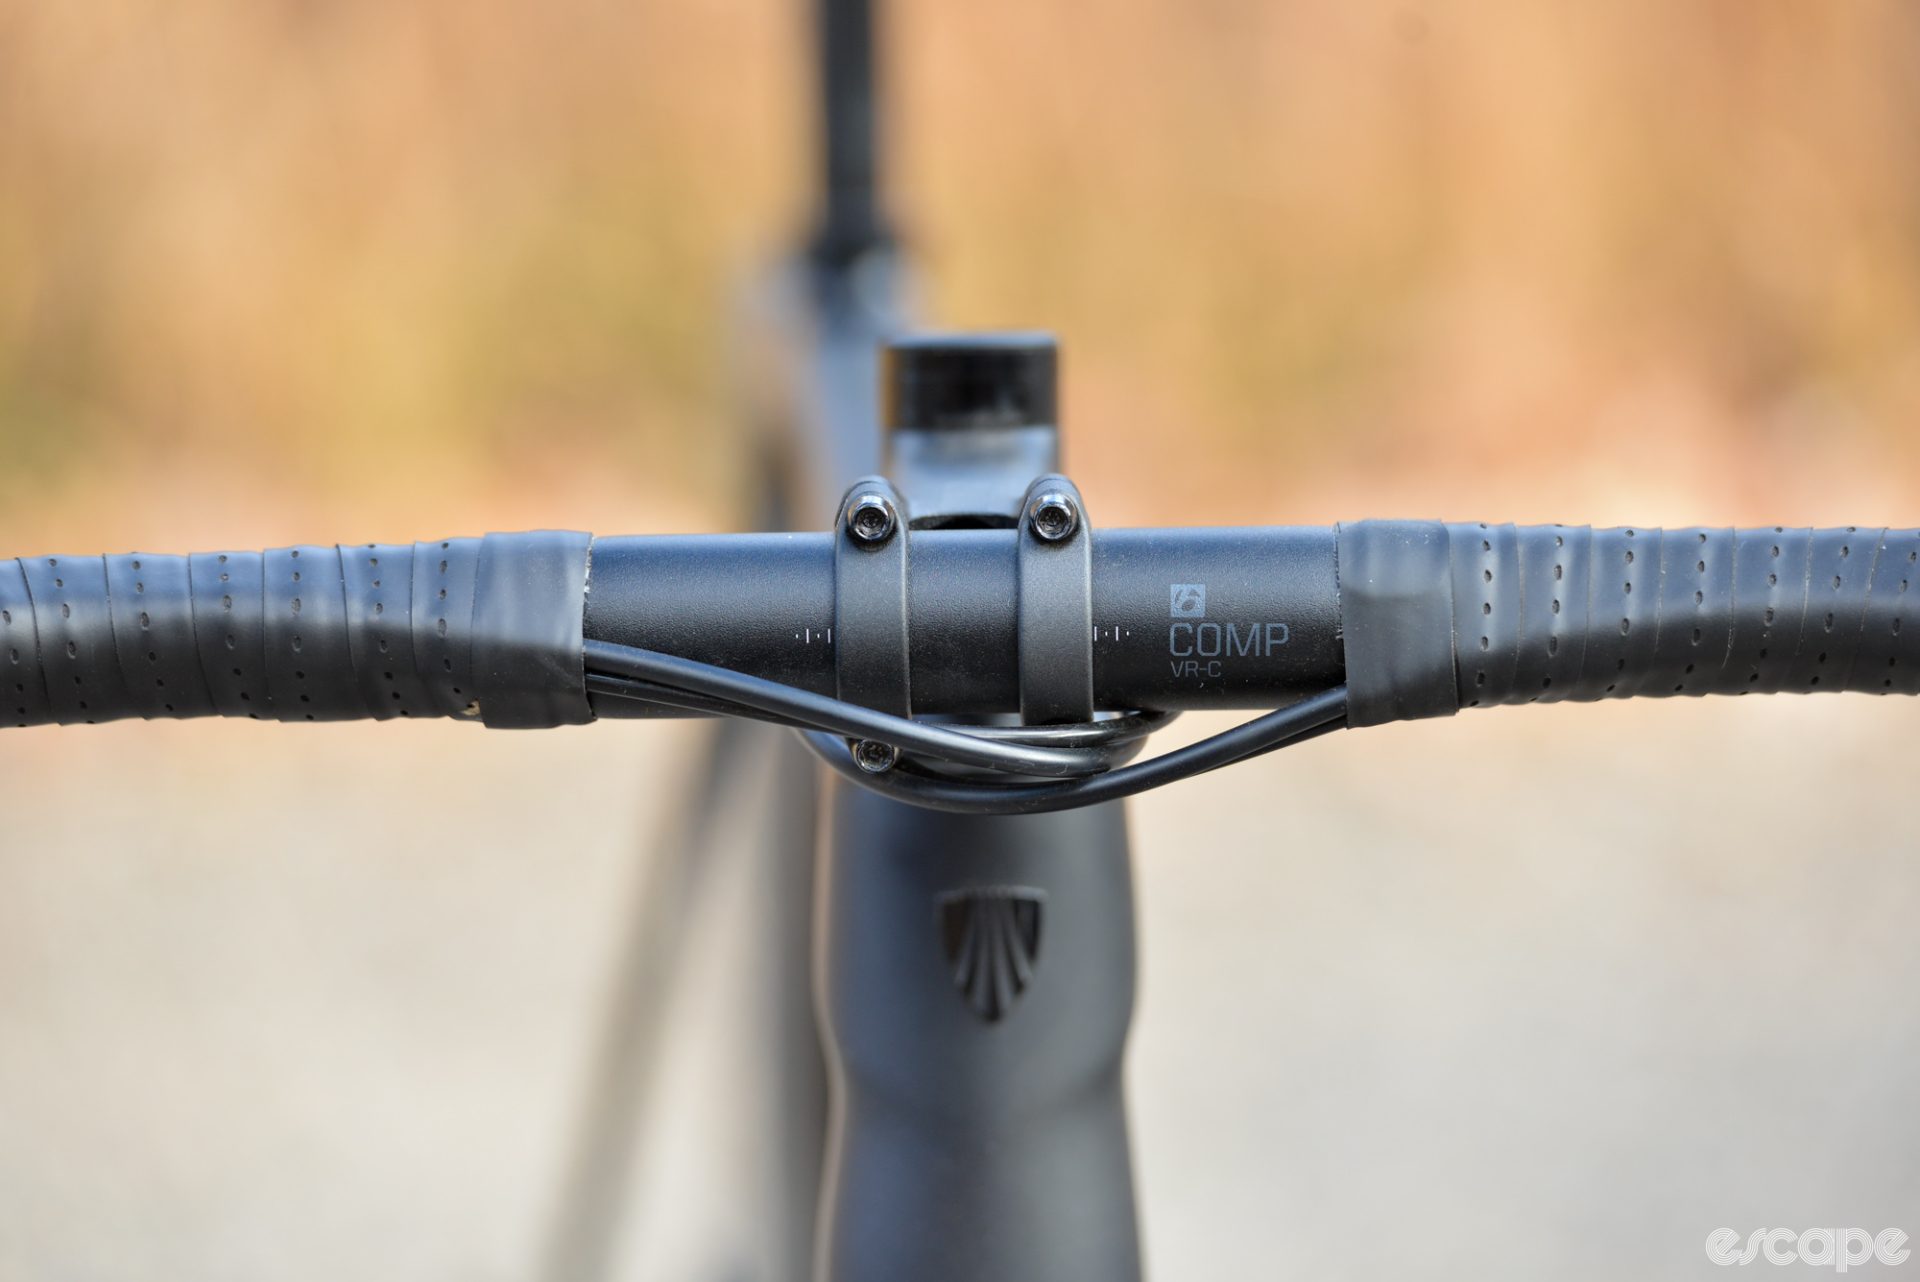 The Bontrager bar, stem, and another look at the internal-ish cable routing.